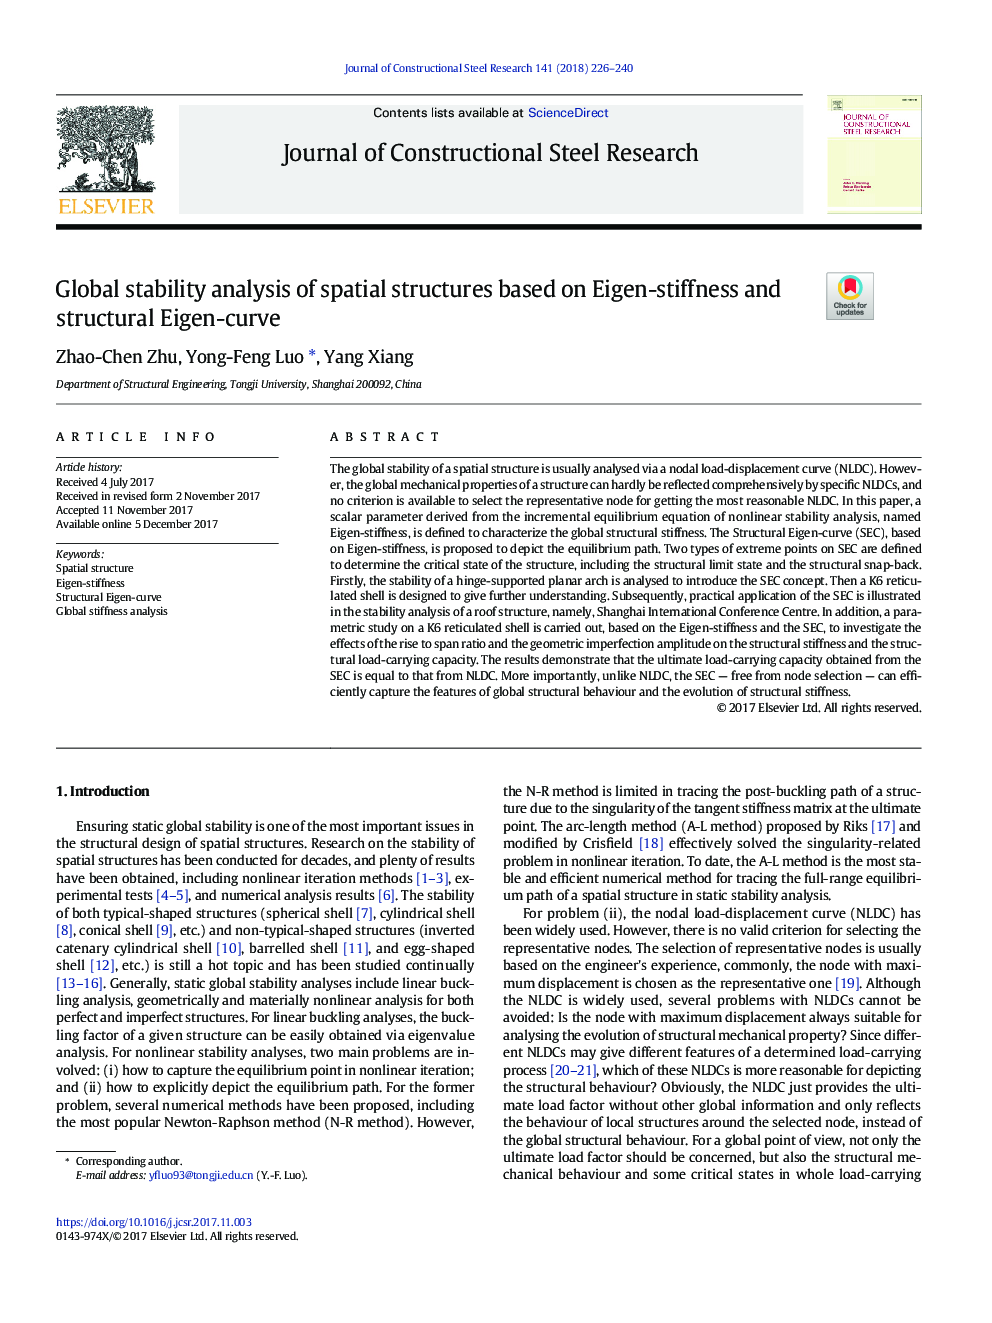 Global stability analysis of spatial structures based on Eigen-stiffness and structural Eigen-curve